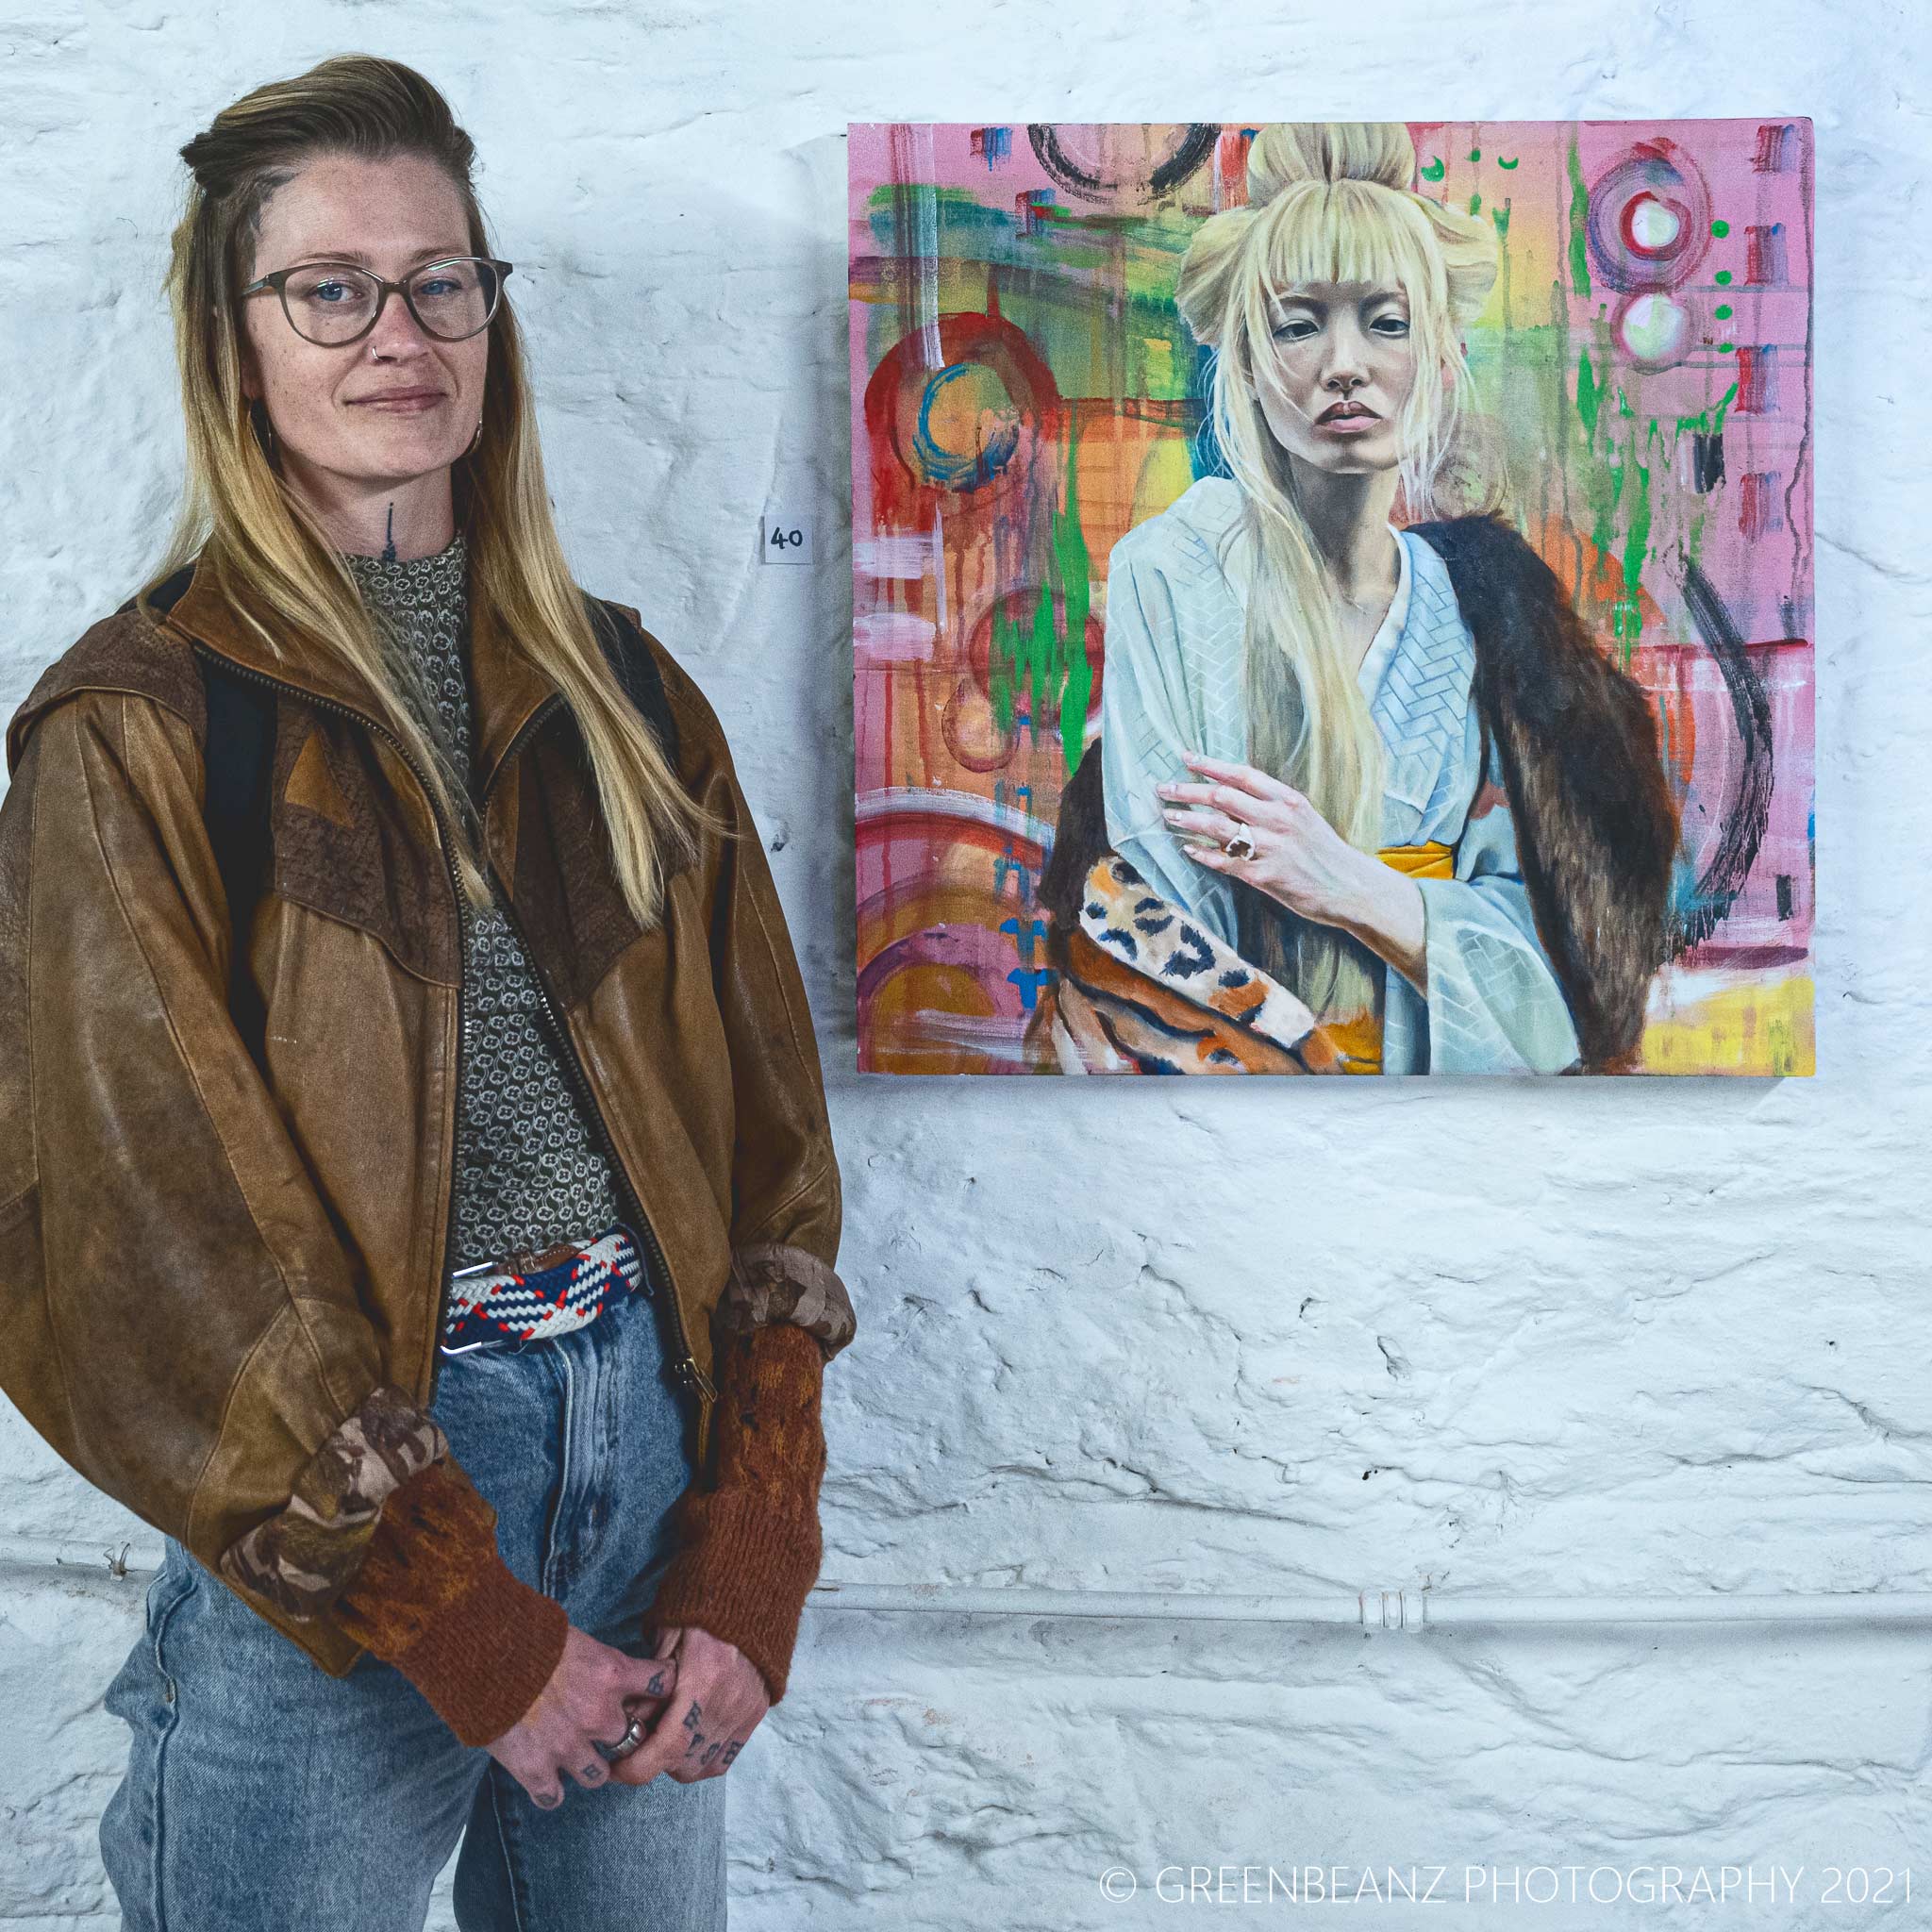 Roisin Cunnigham with one of her exhibited portraits